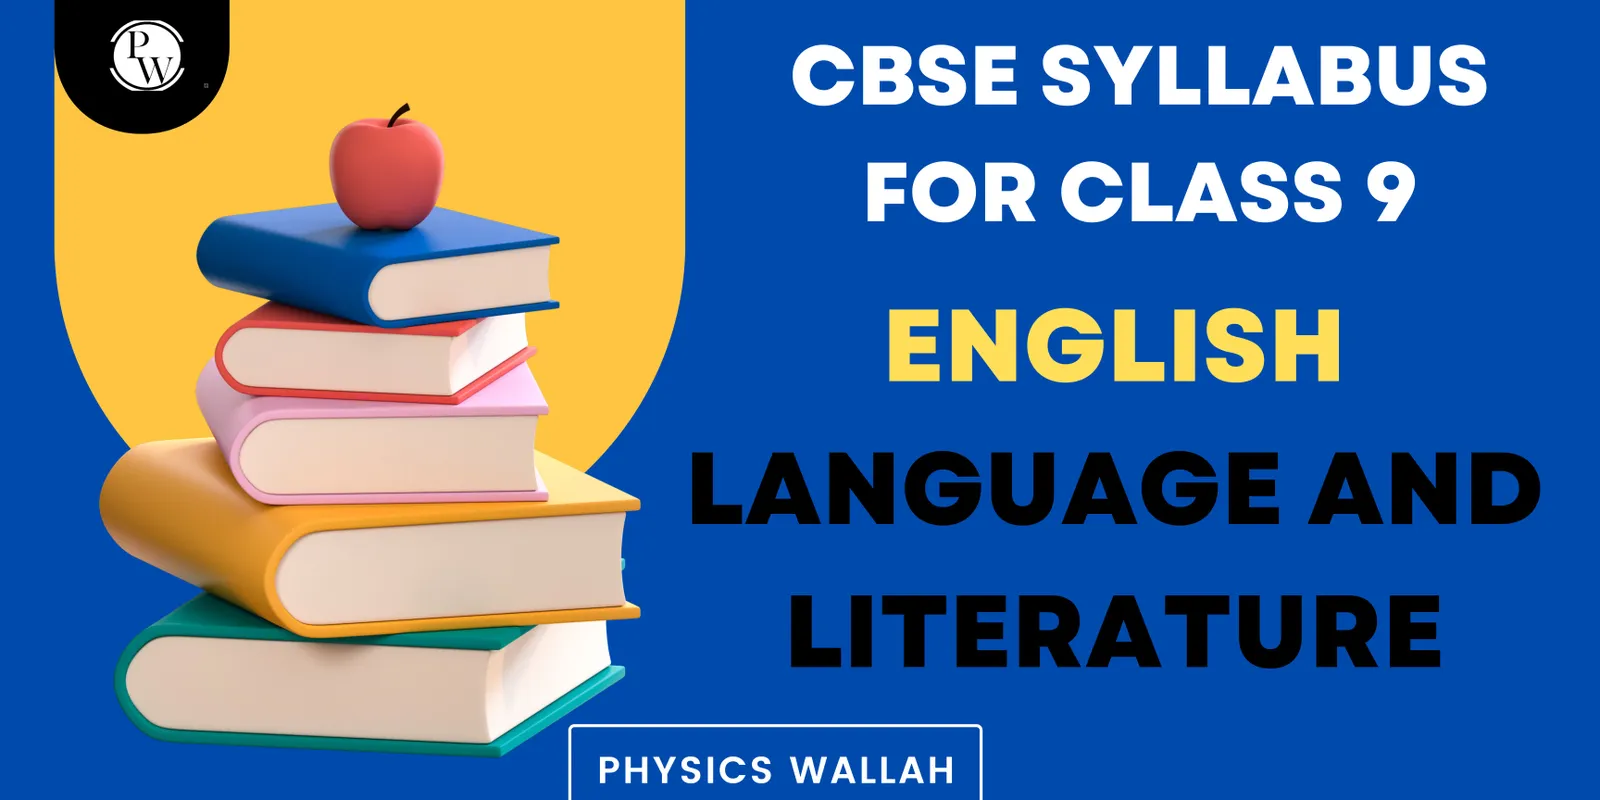 CBSE Revised Syllabus for Class 9 English Language and Literature